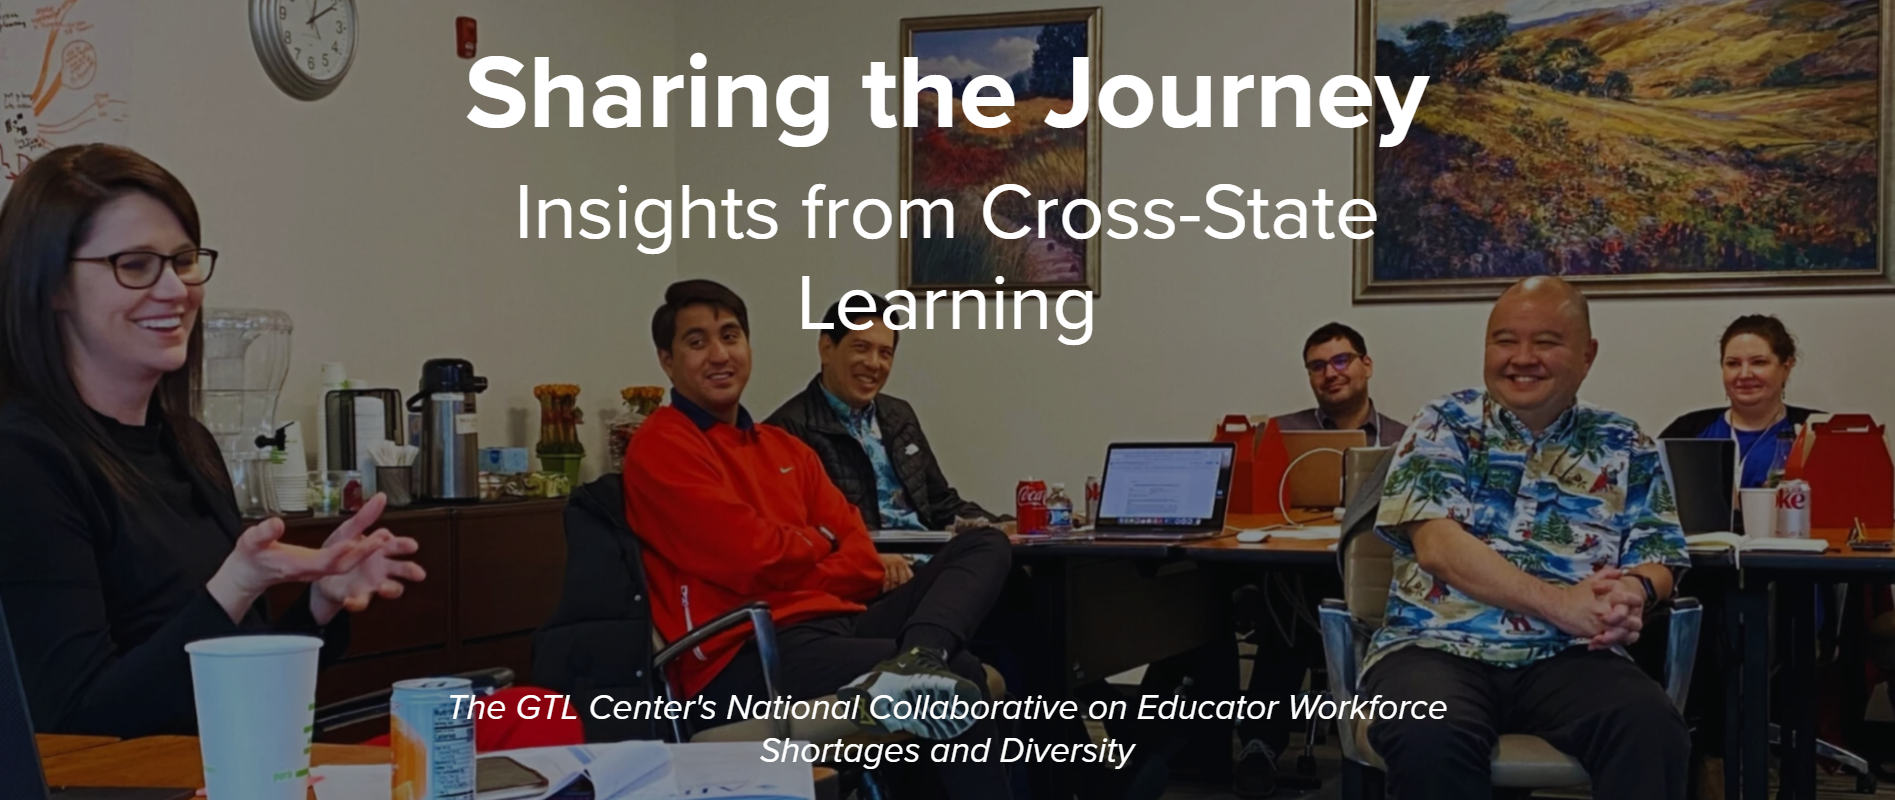 Title page of Digital narrative: sharing the journey-insights from cross state learning